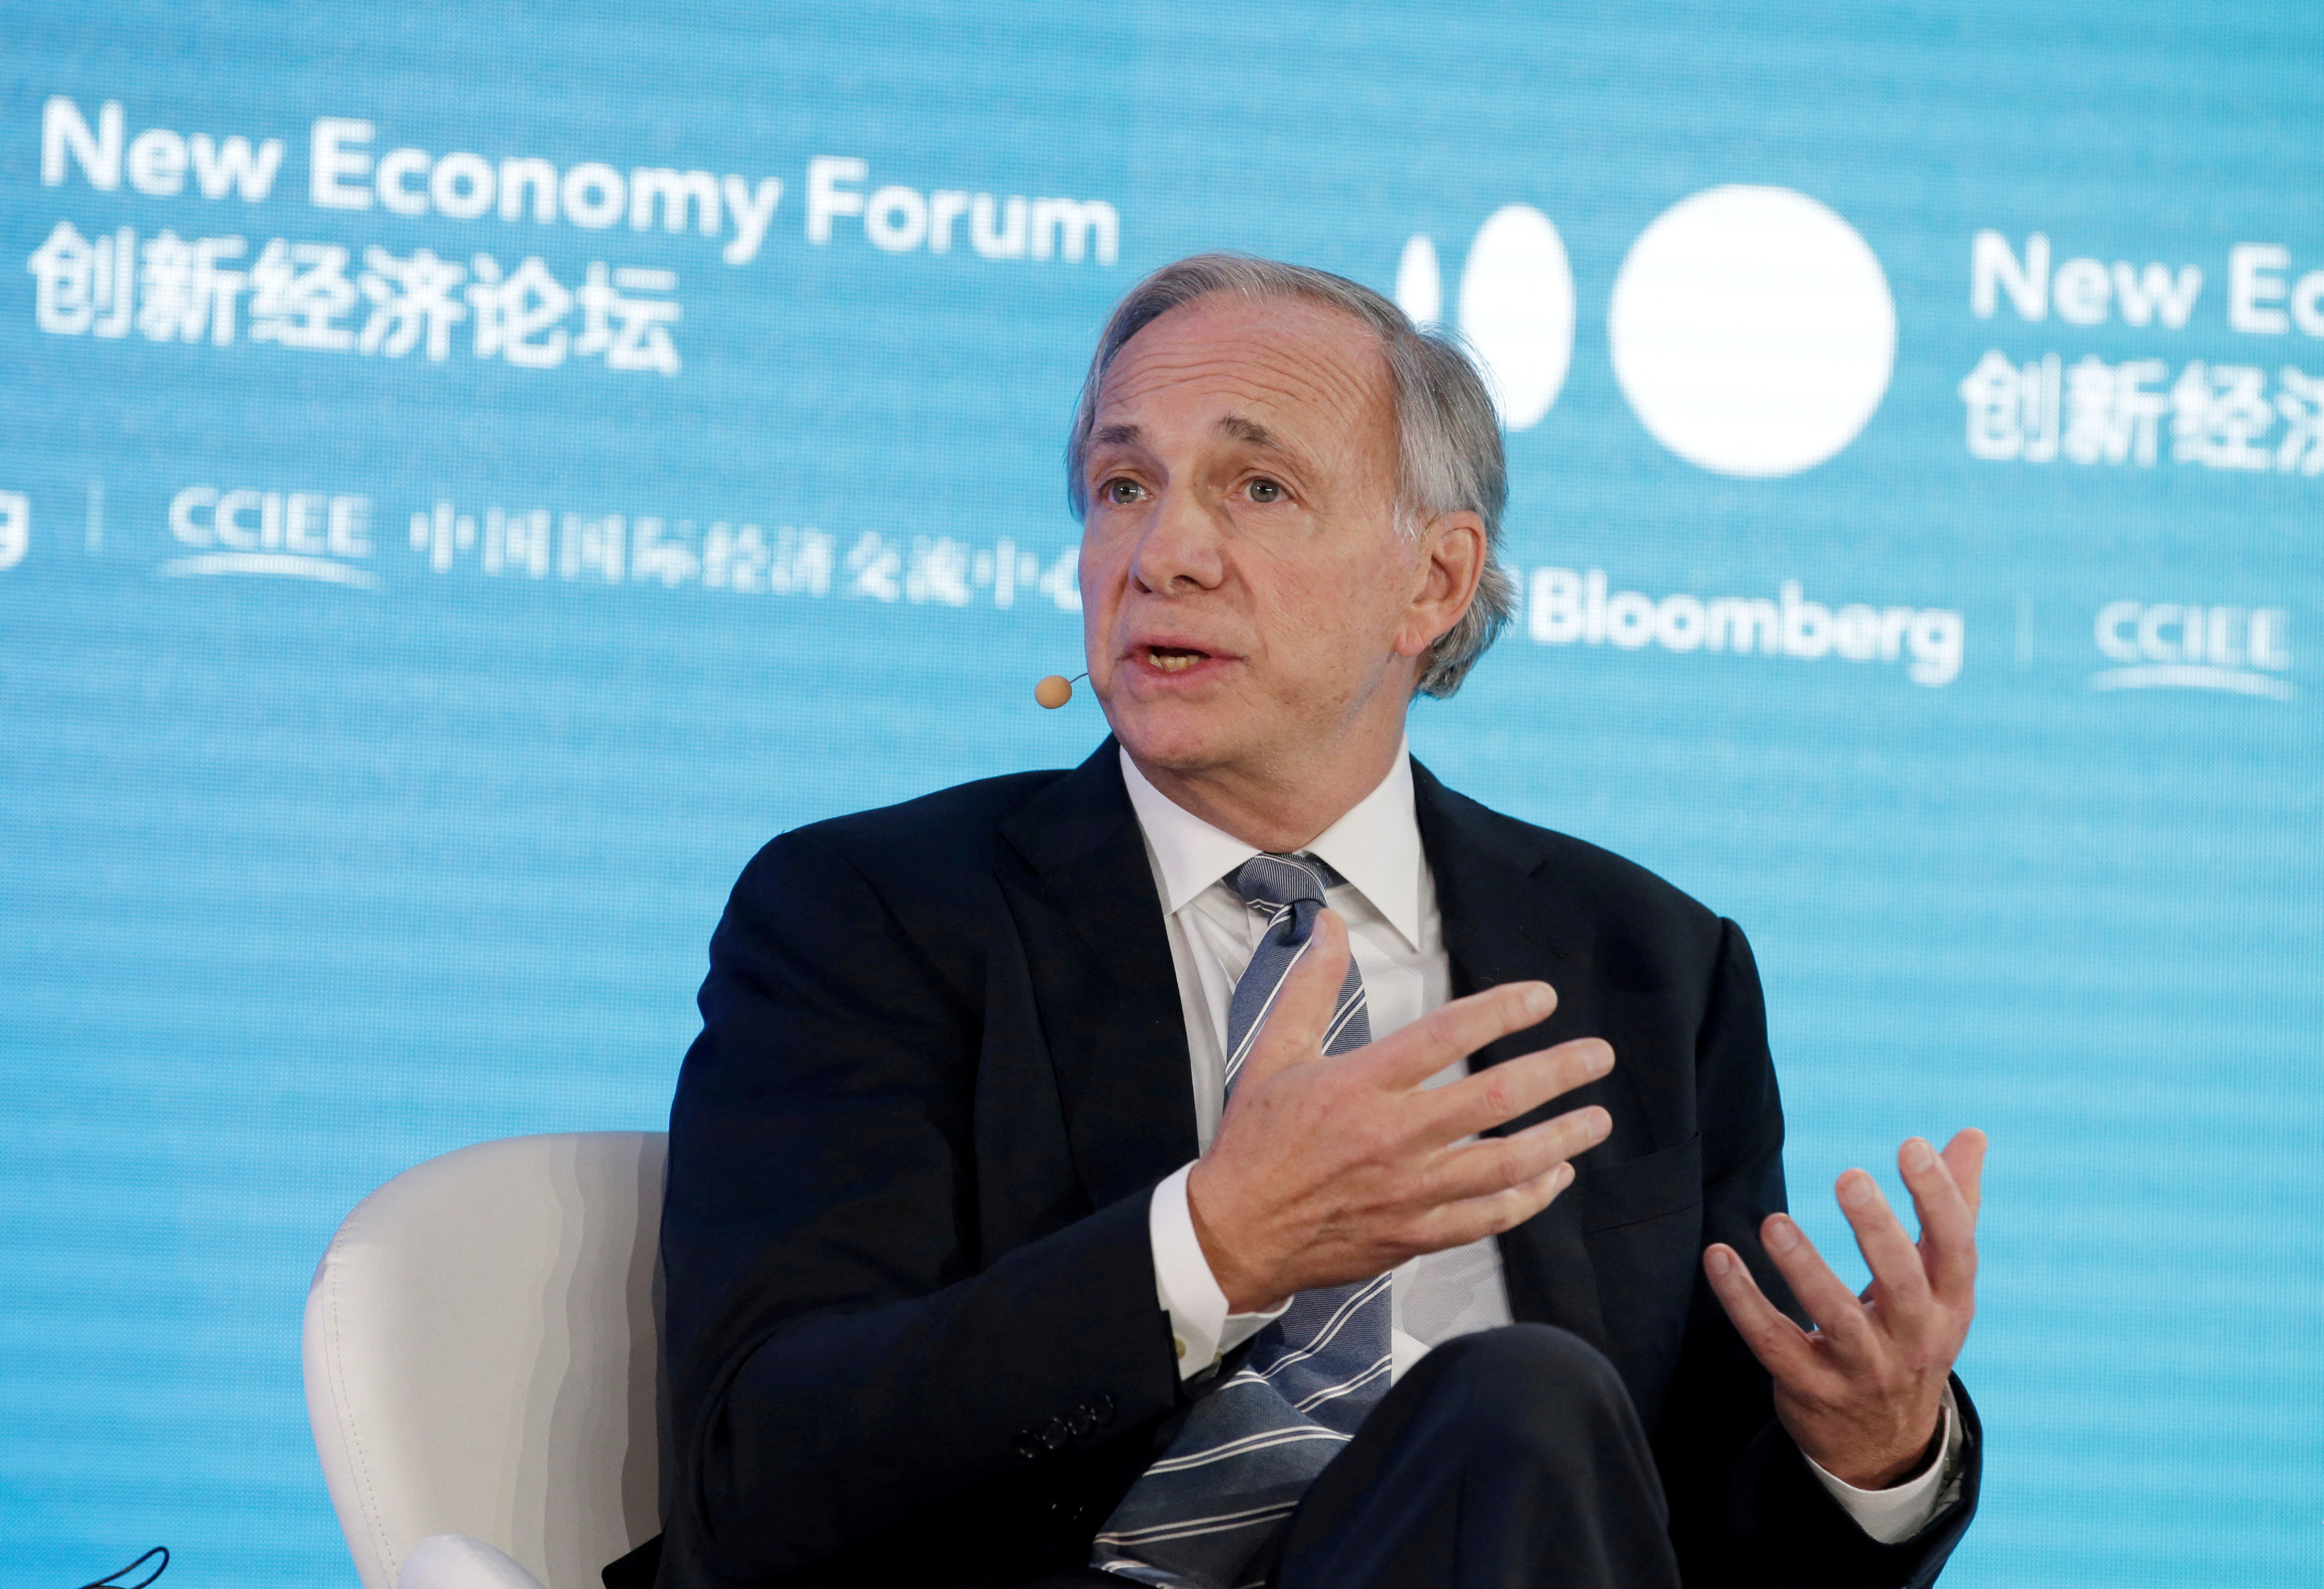 Ray Dalio, founder and co-chief investment officer of Bridgewater Associates, speaks at the 2019 New Economy Forum in Beijing